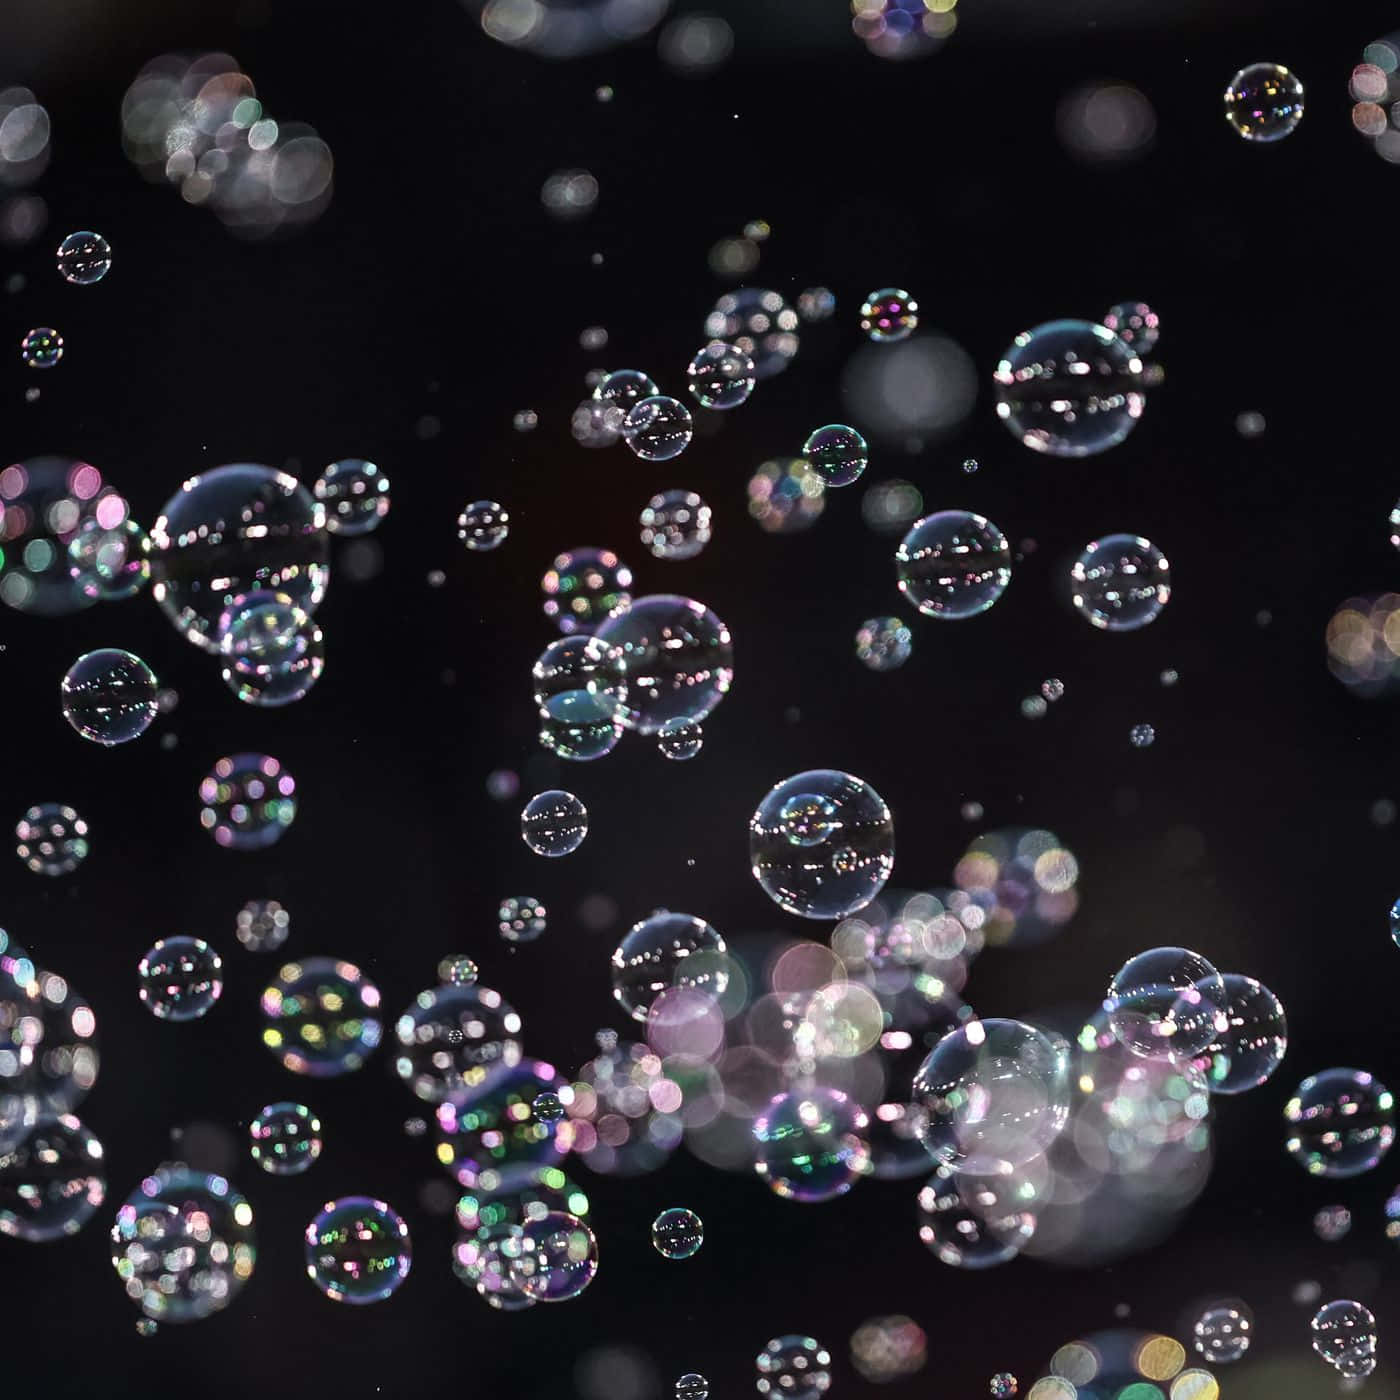 Colorful Bubbles Glowing in the Dark